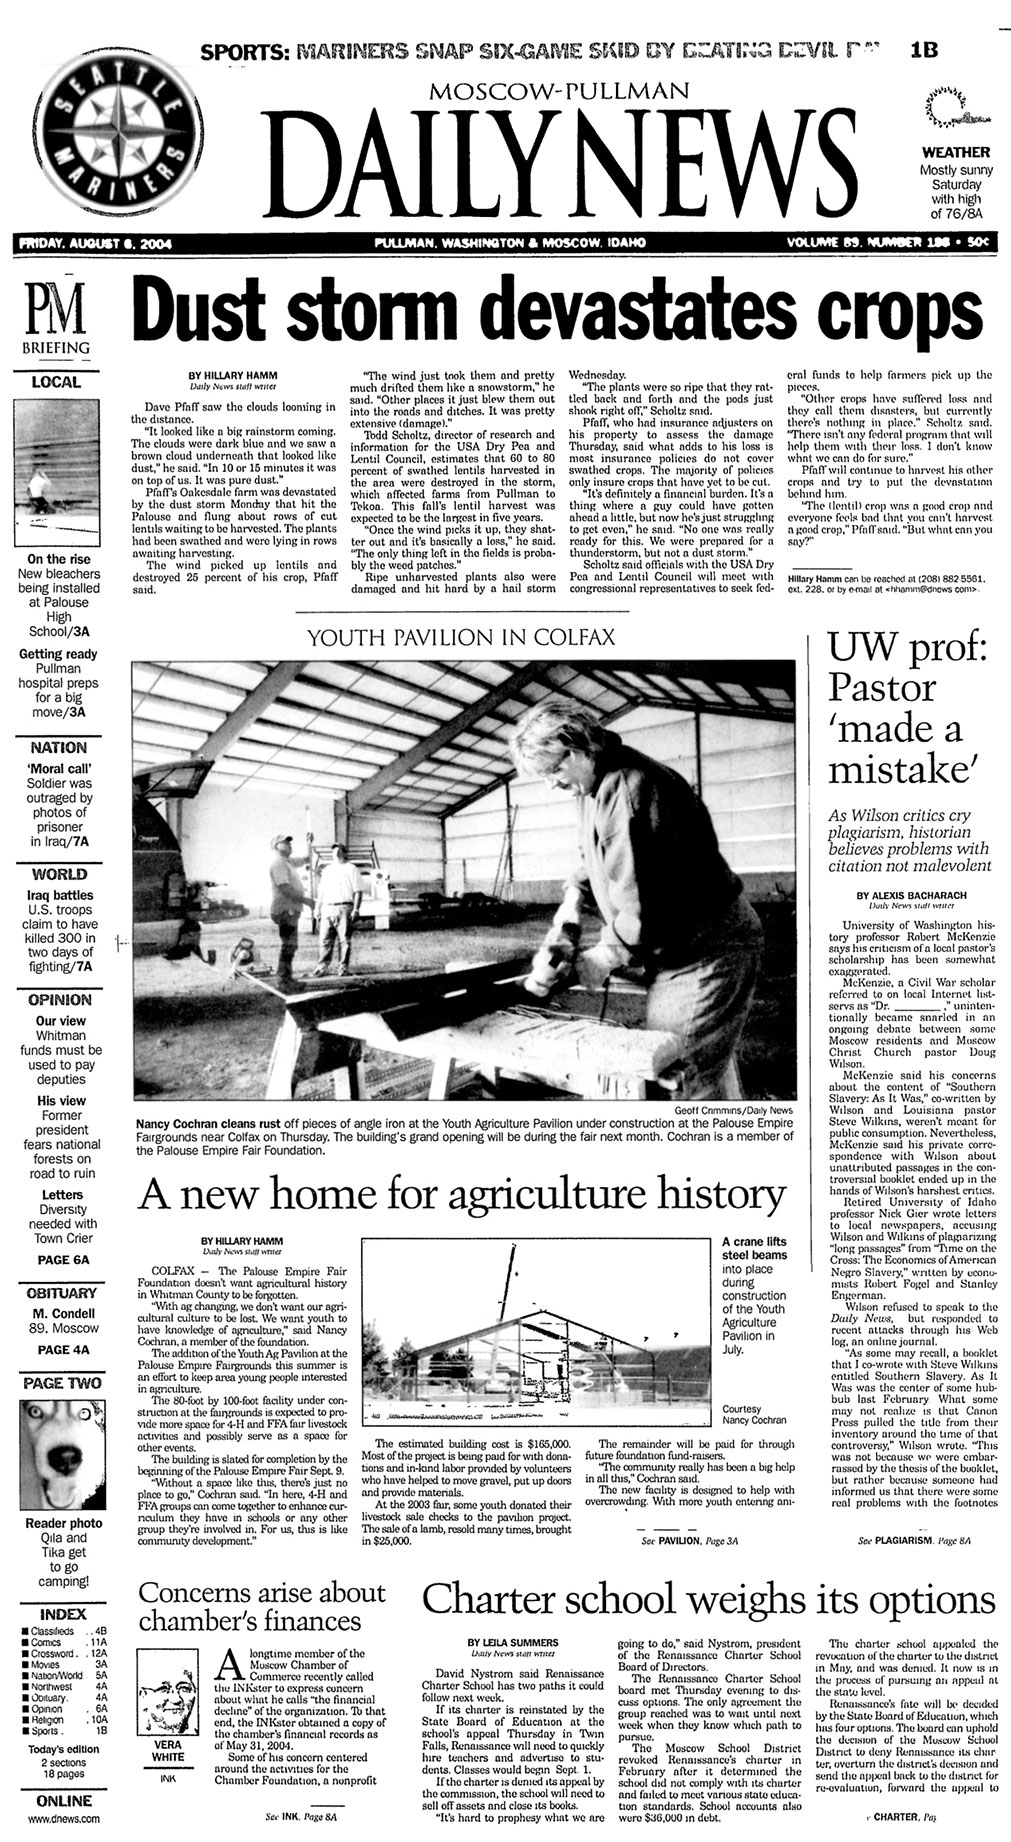 Moscow-Pullman Daily News: UW prof: Pastor ‘made a mistake’